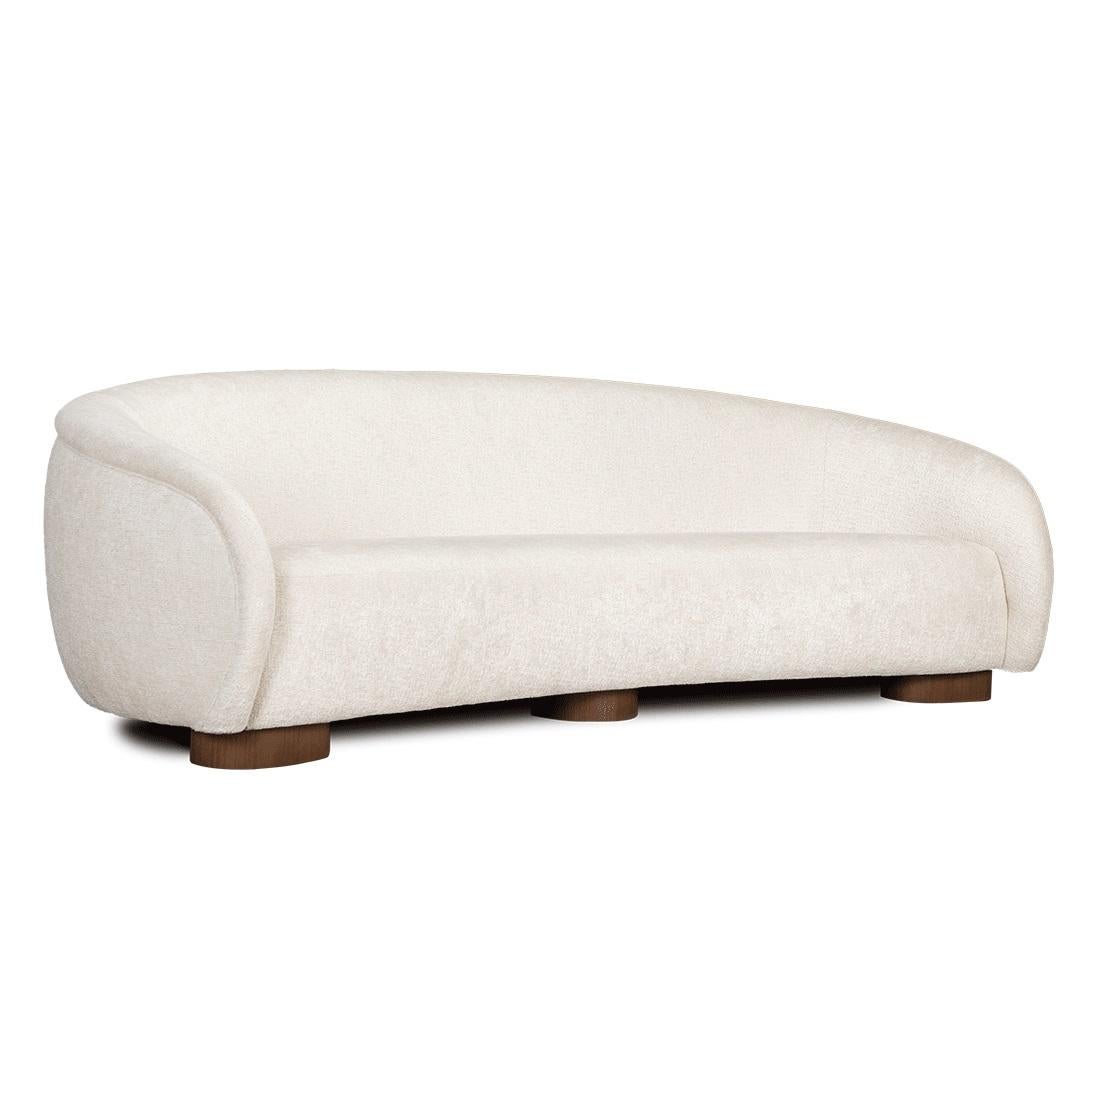 This exceptional sofa brings you more curves and comfort. This sofa includes four 45x 45 cushions and has a solid wood structure with feet in standard finishes.
We do our best to expedite production and to ship and deliver product within the listed